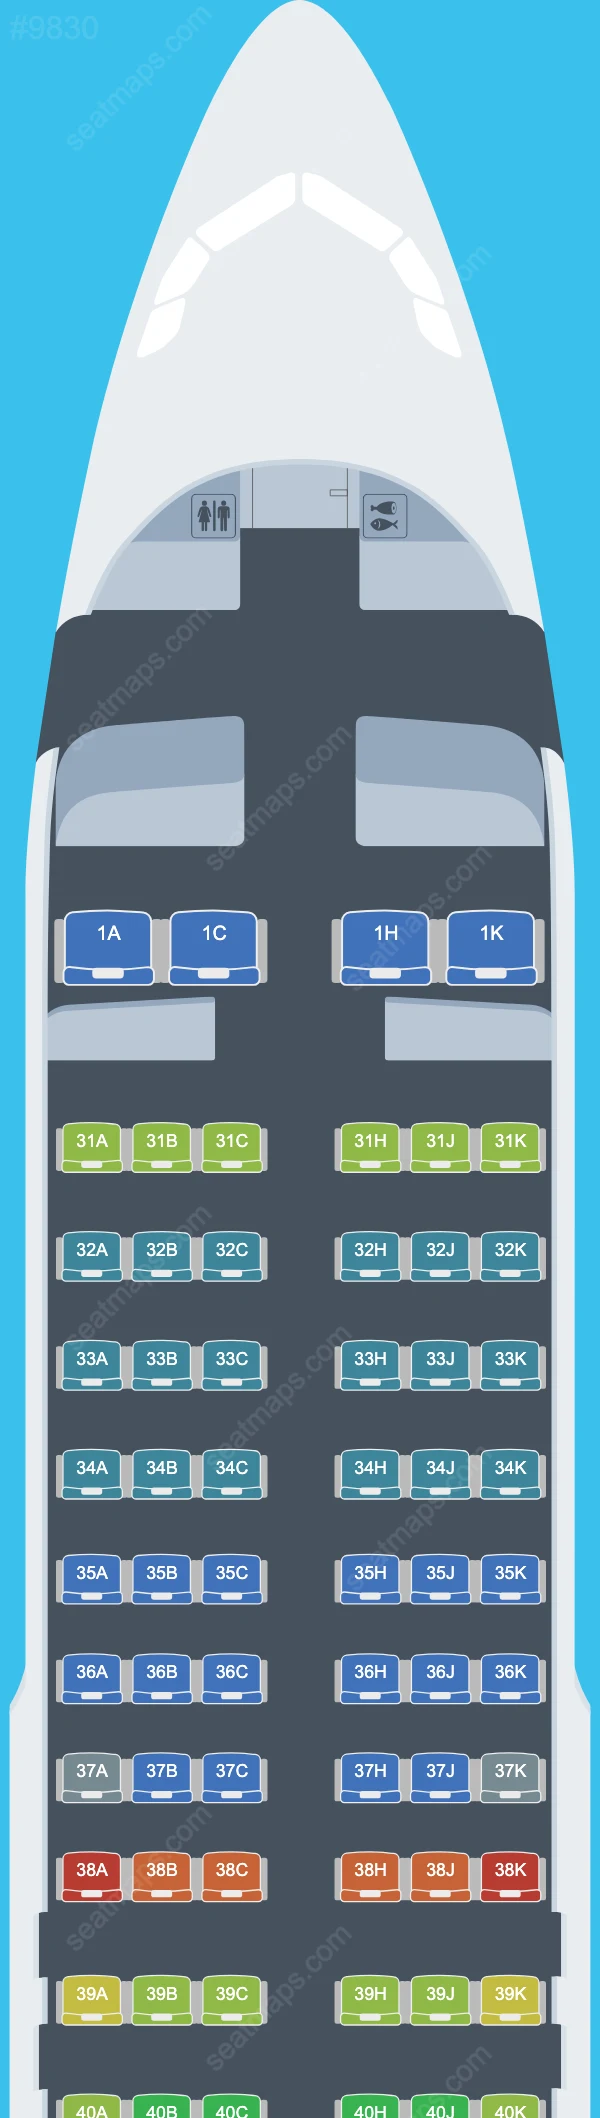 China Southern Airbus A320 Seat Maps A320-200neo V.1